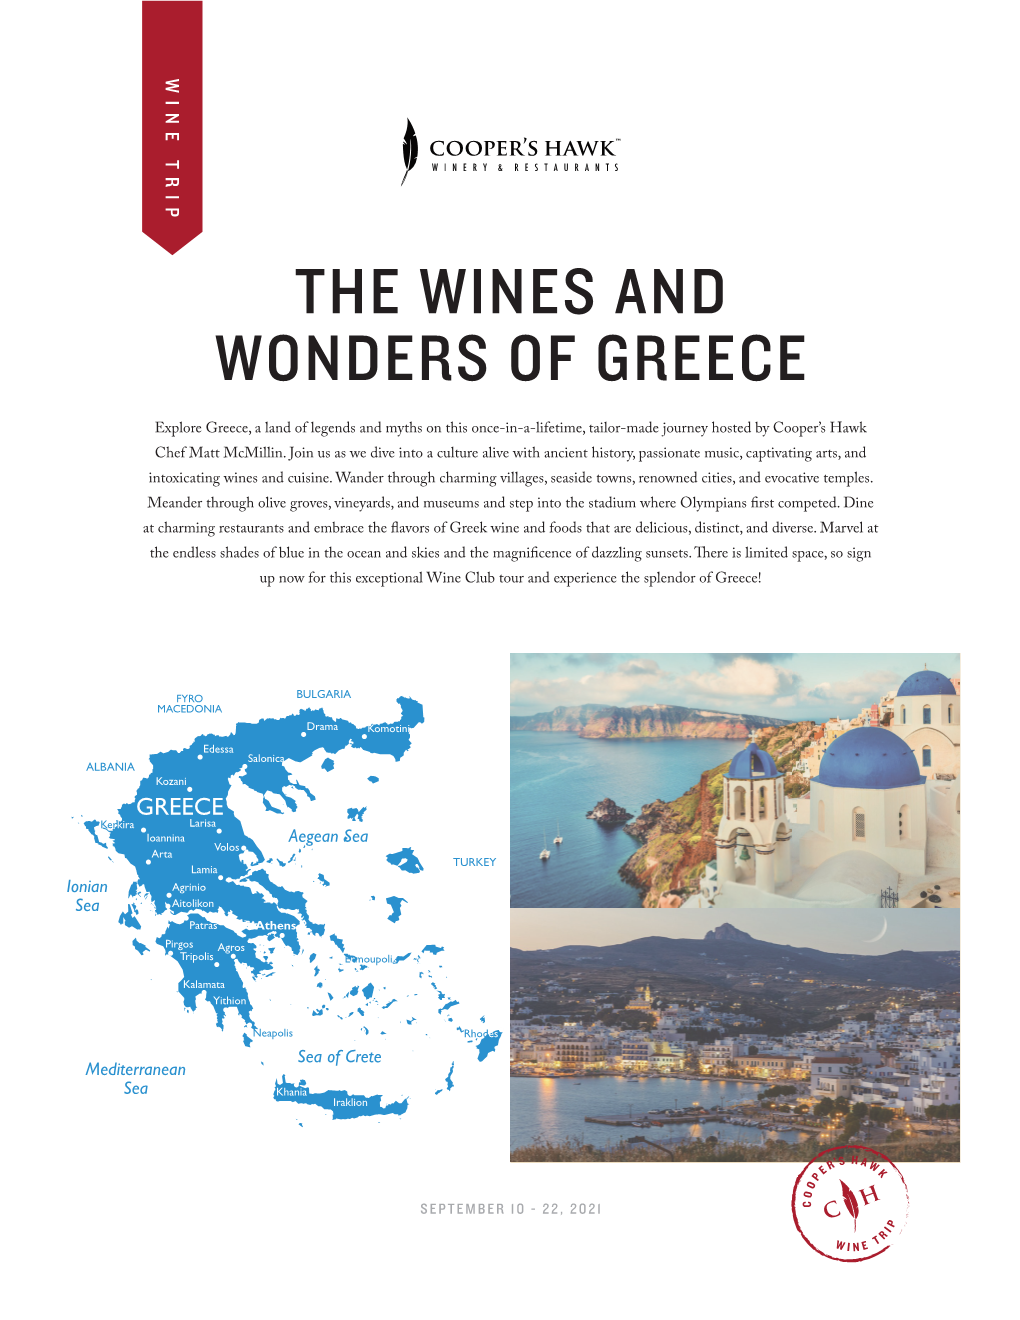 The Wines and Wonders of Greece